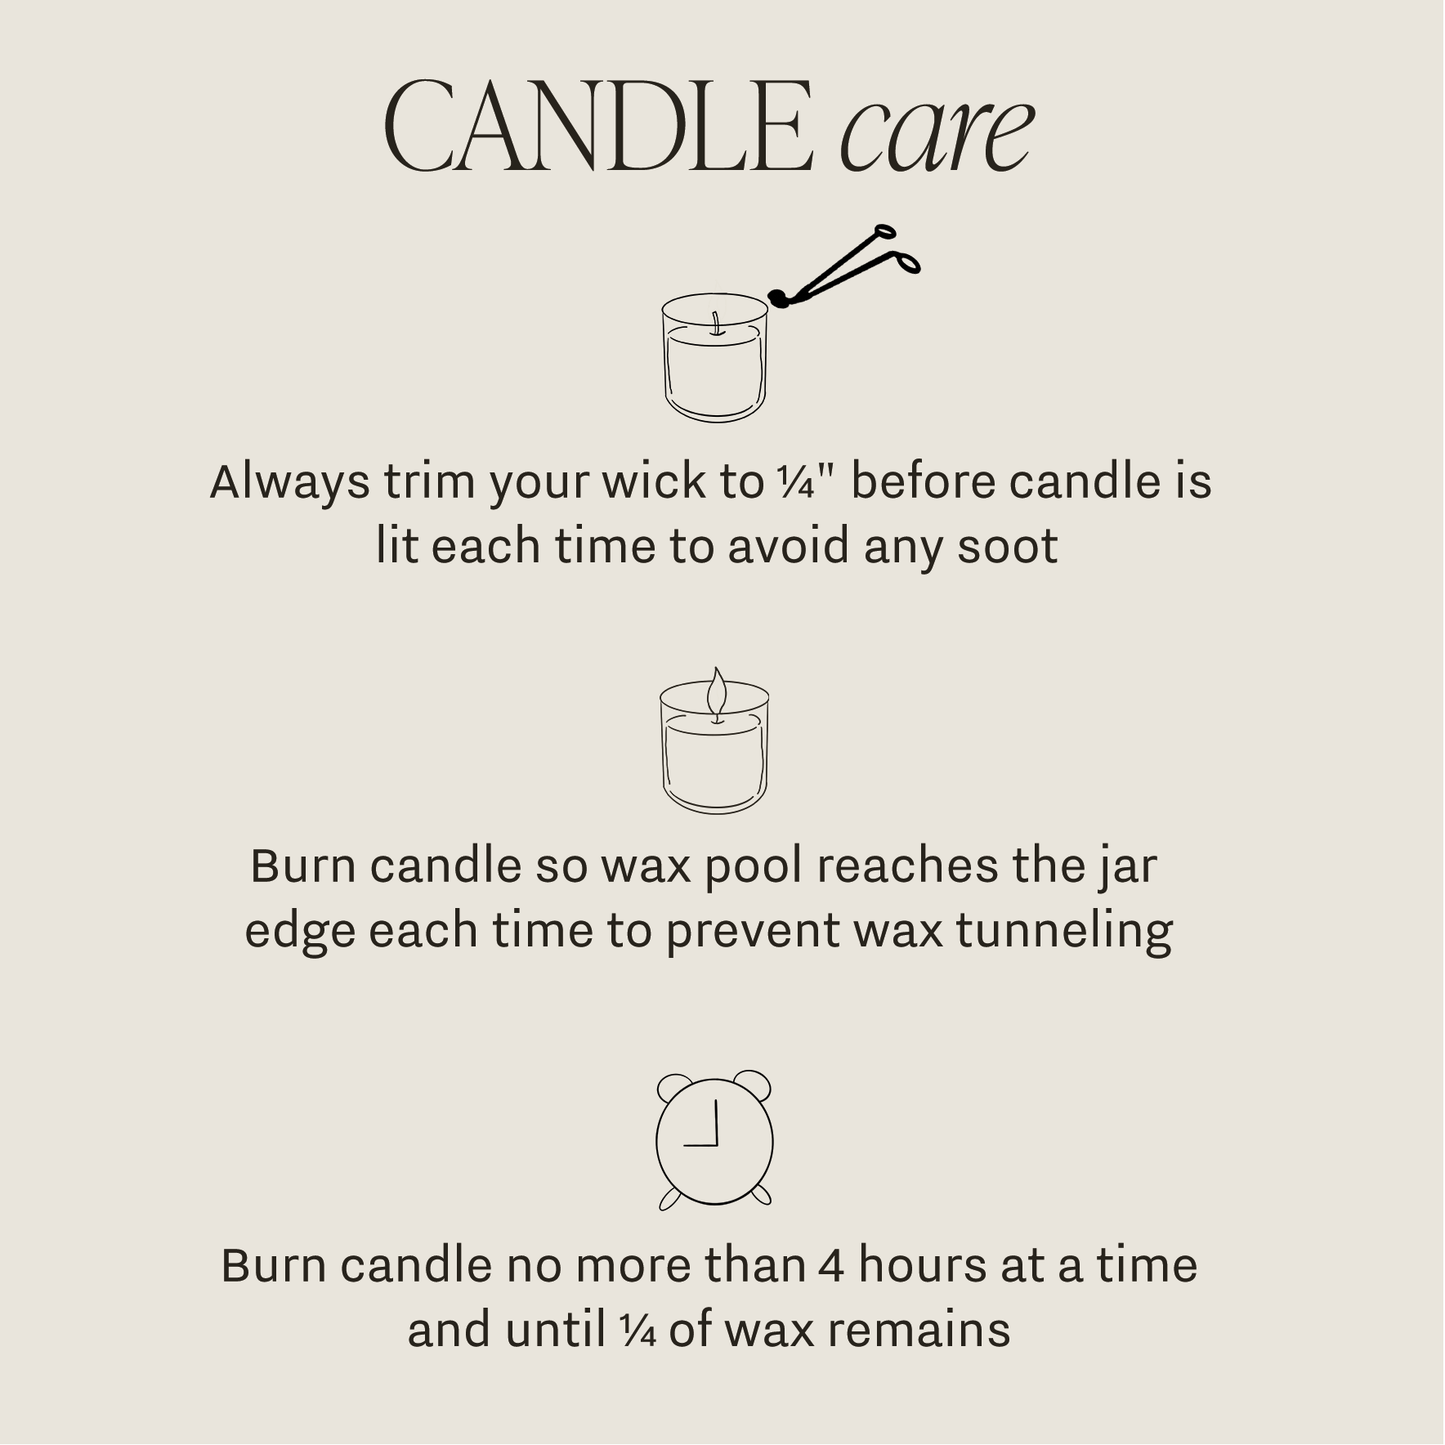 Happy Day Candle